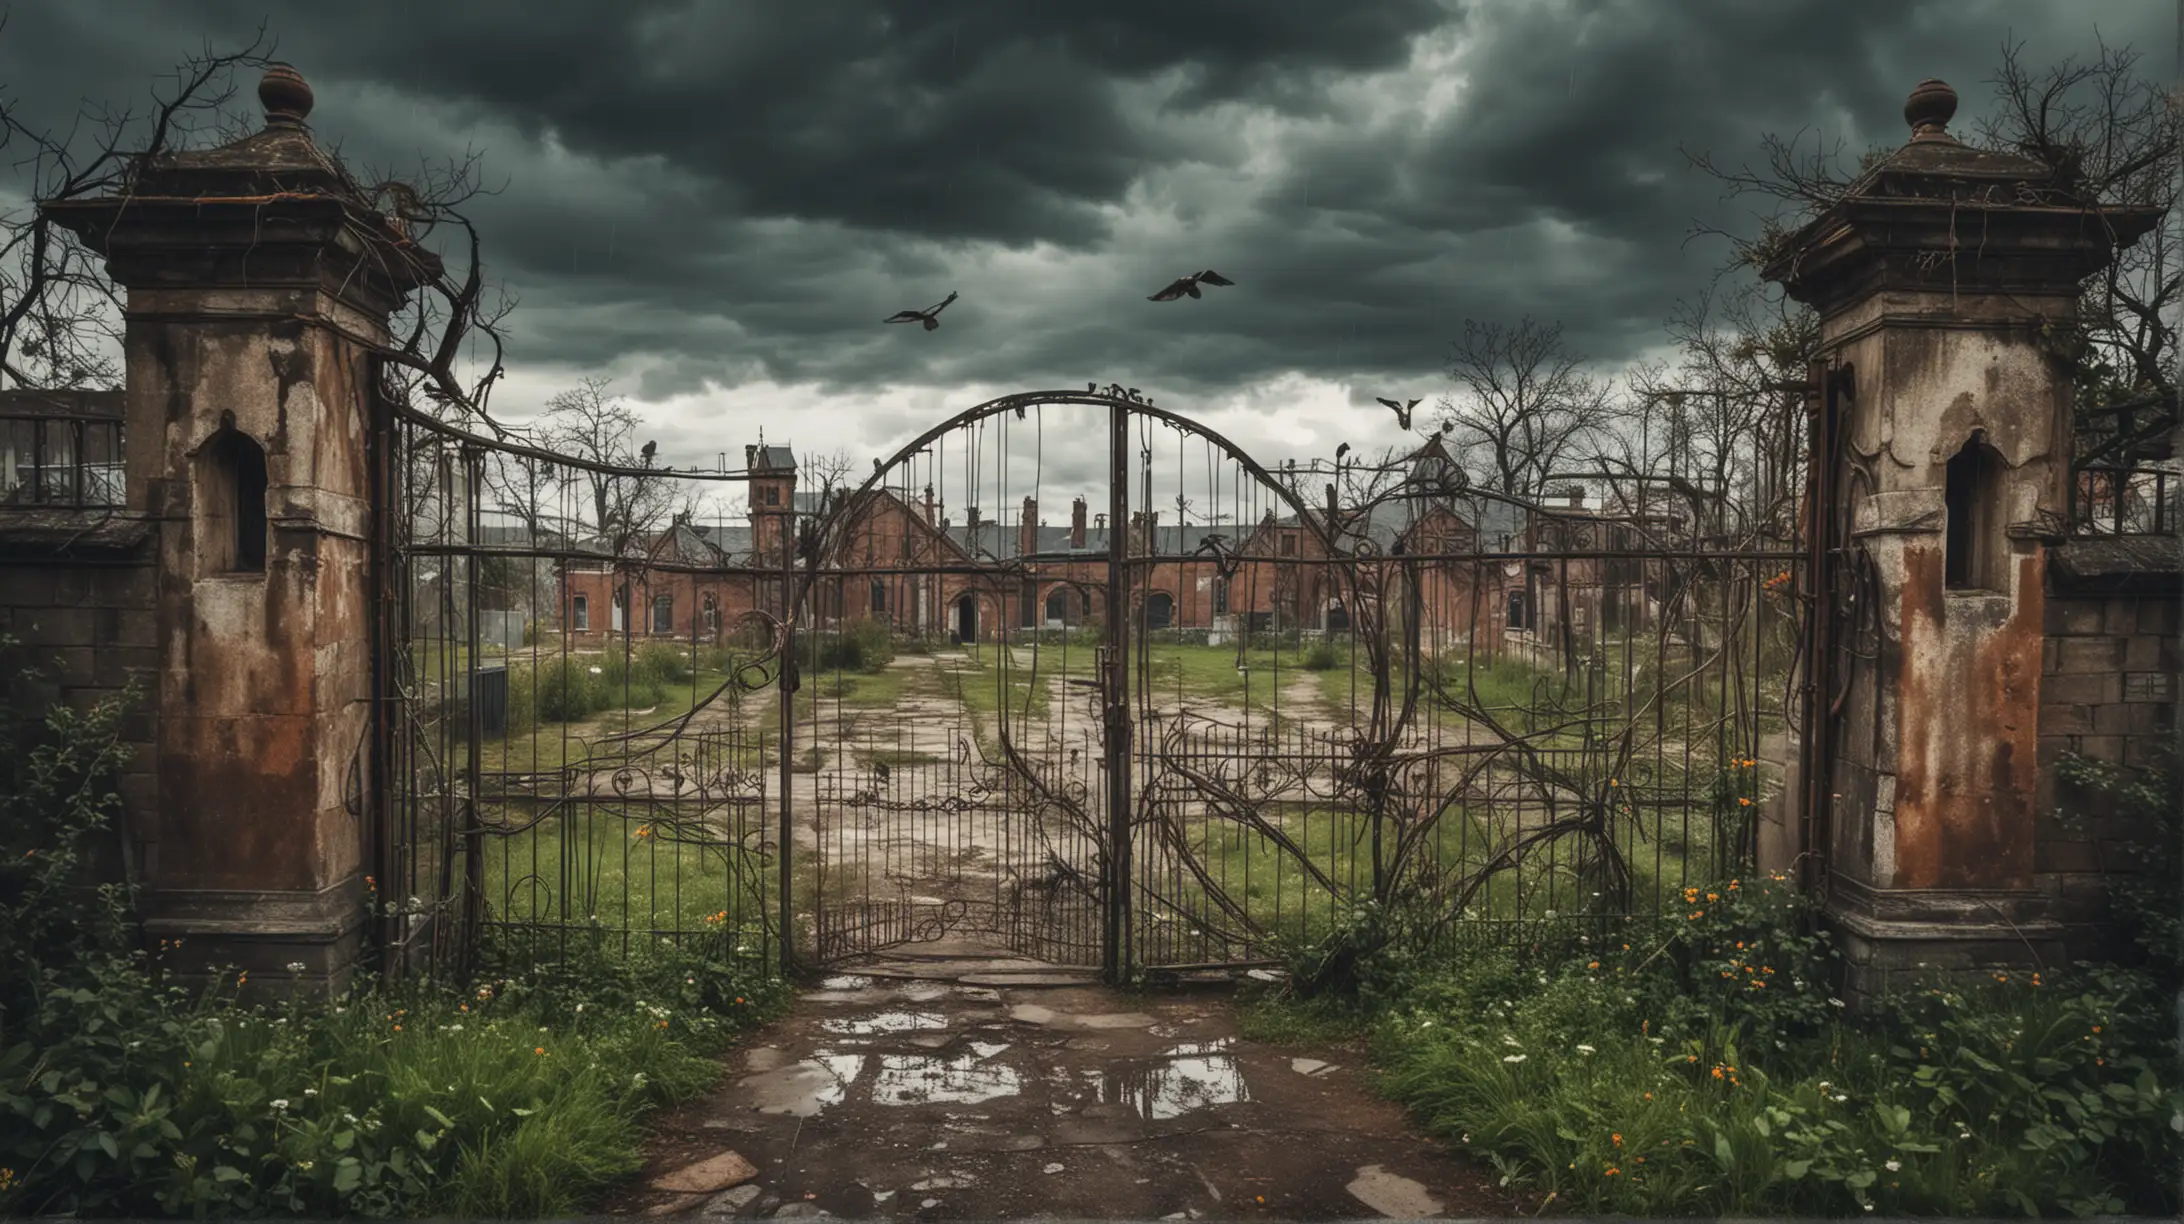 an old steampunk lunatic asylum, old devastated fence with a wide gate, neglected garden, bird's eye view, cloudy, rain